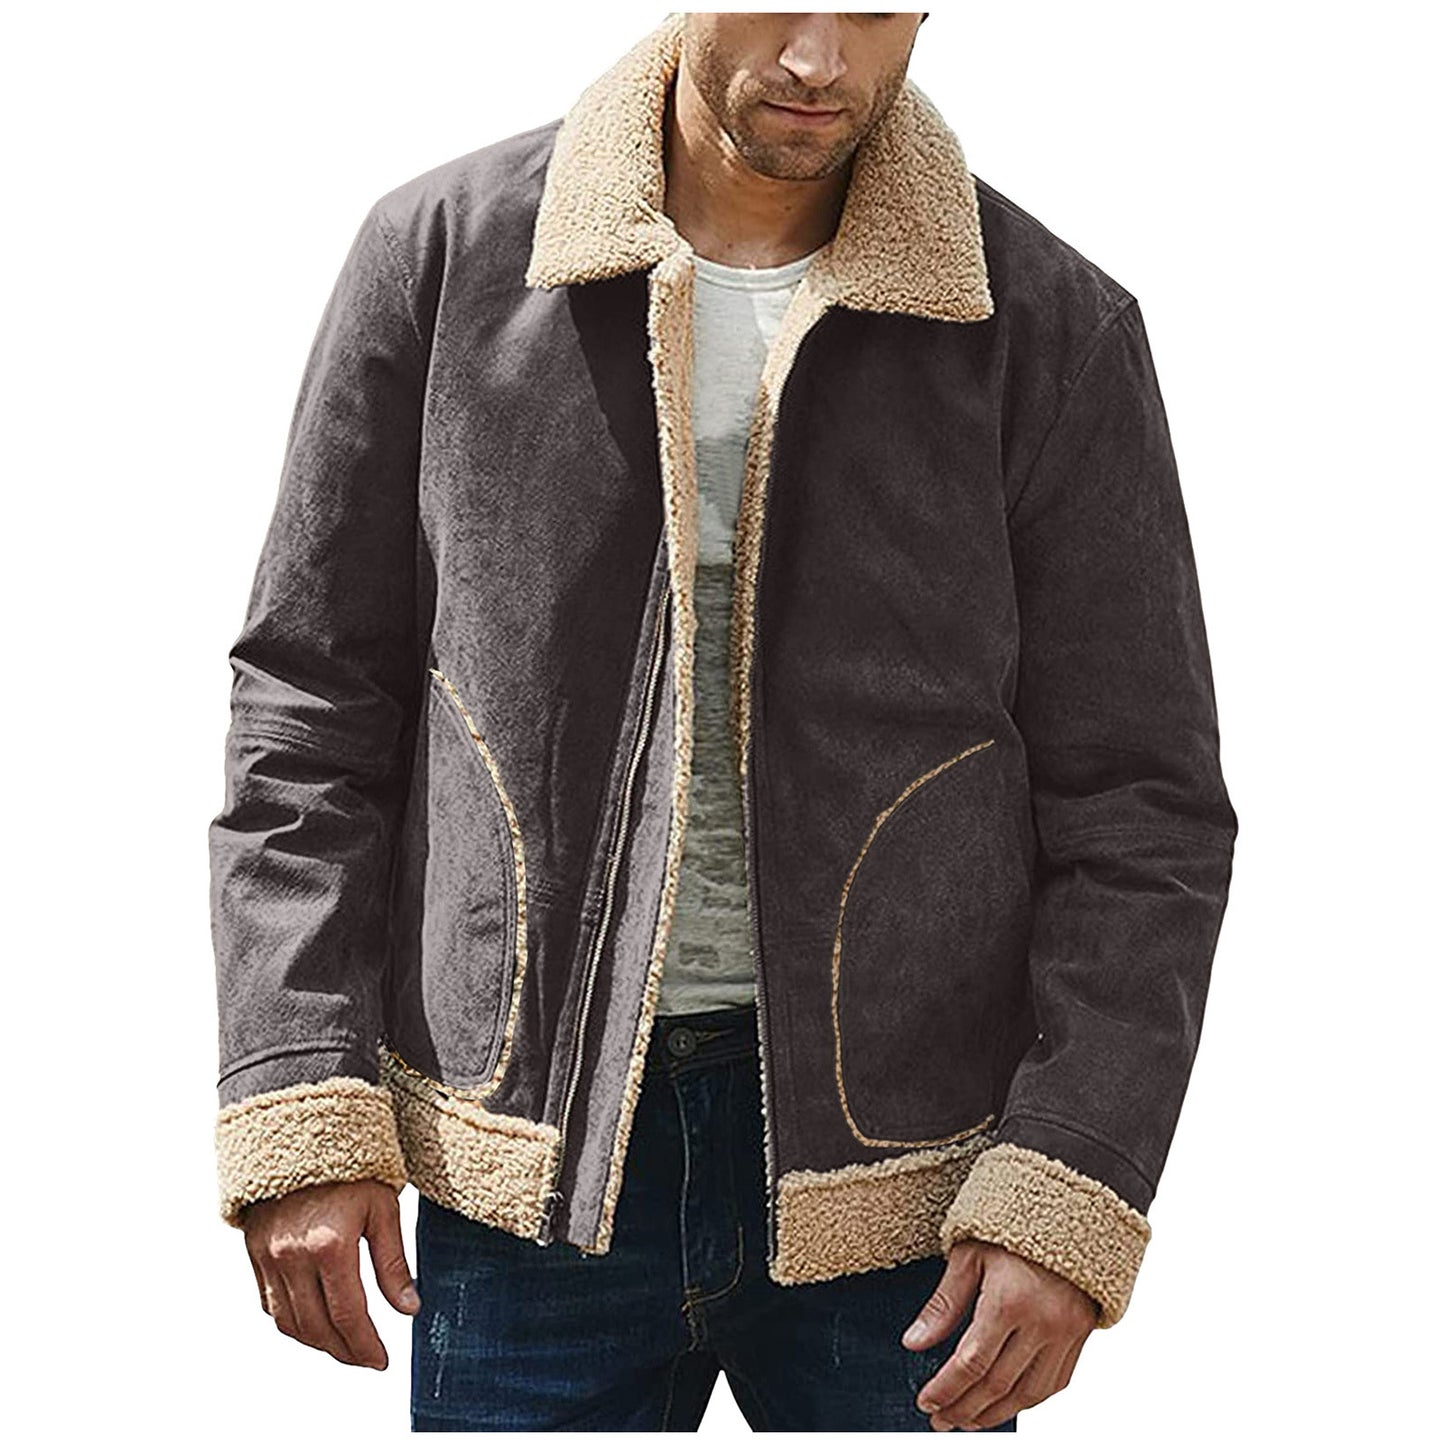 European And American Men's Large Frosted Velvet Composite Coat